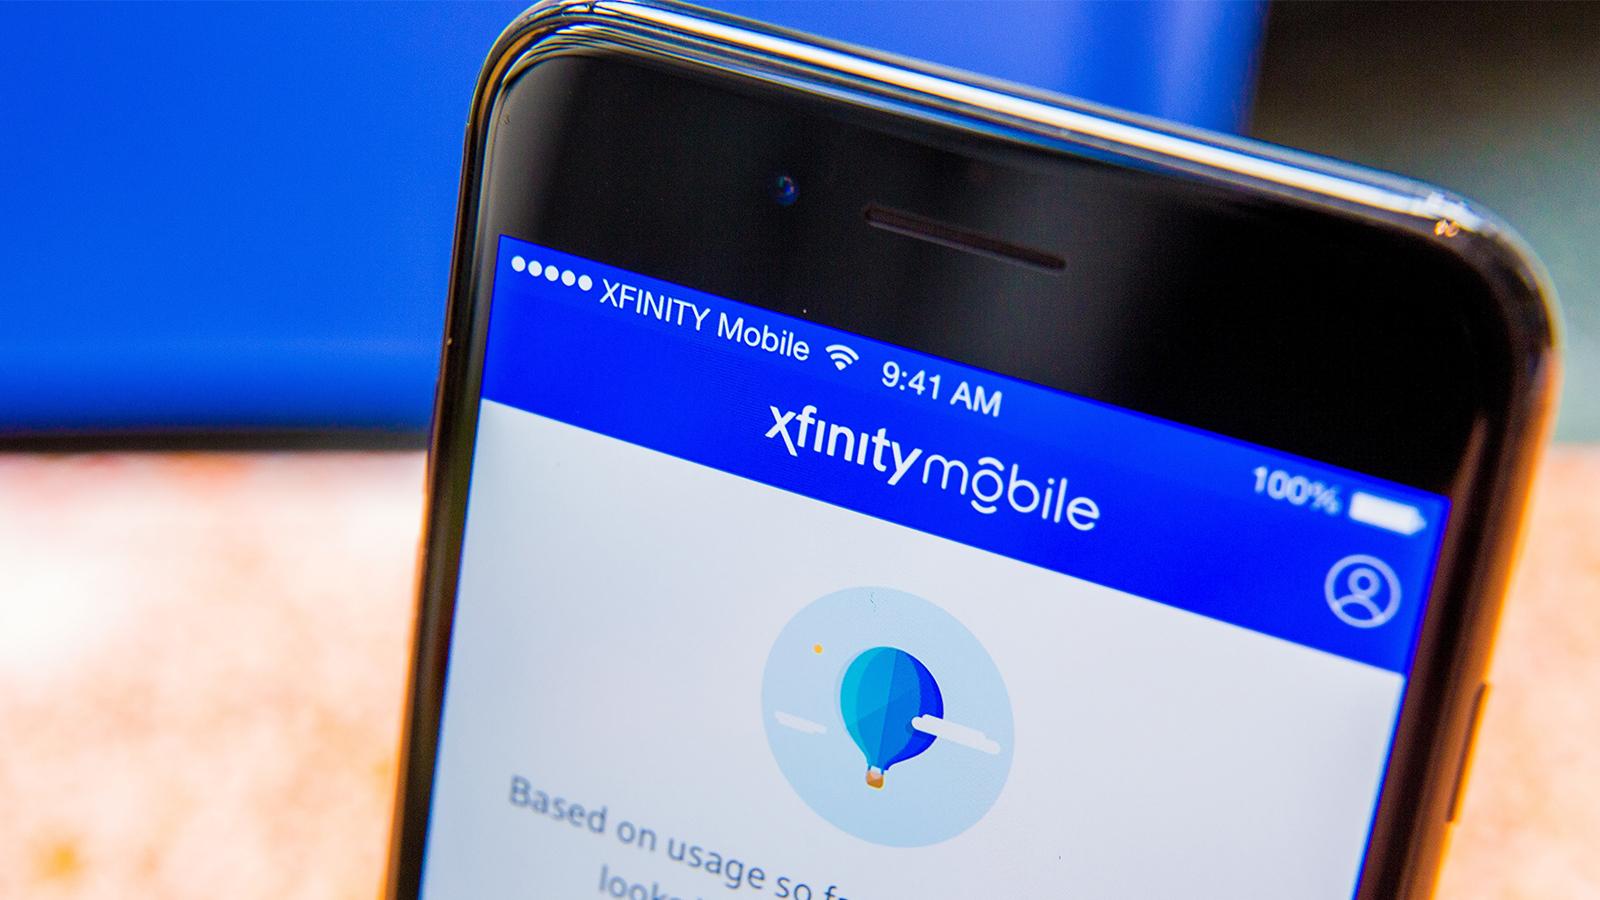 2 Xfinity Mobile Unlimited Cell Phone Plans for $60 Per Month